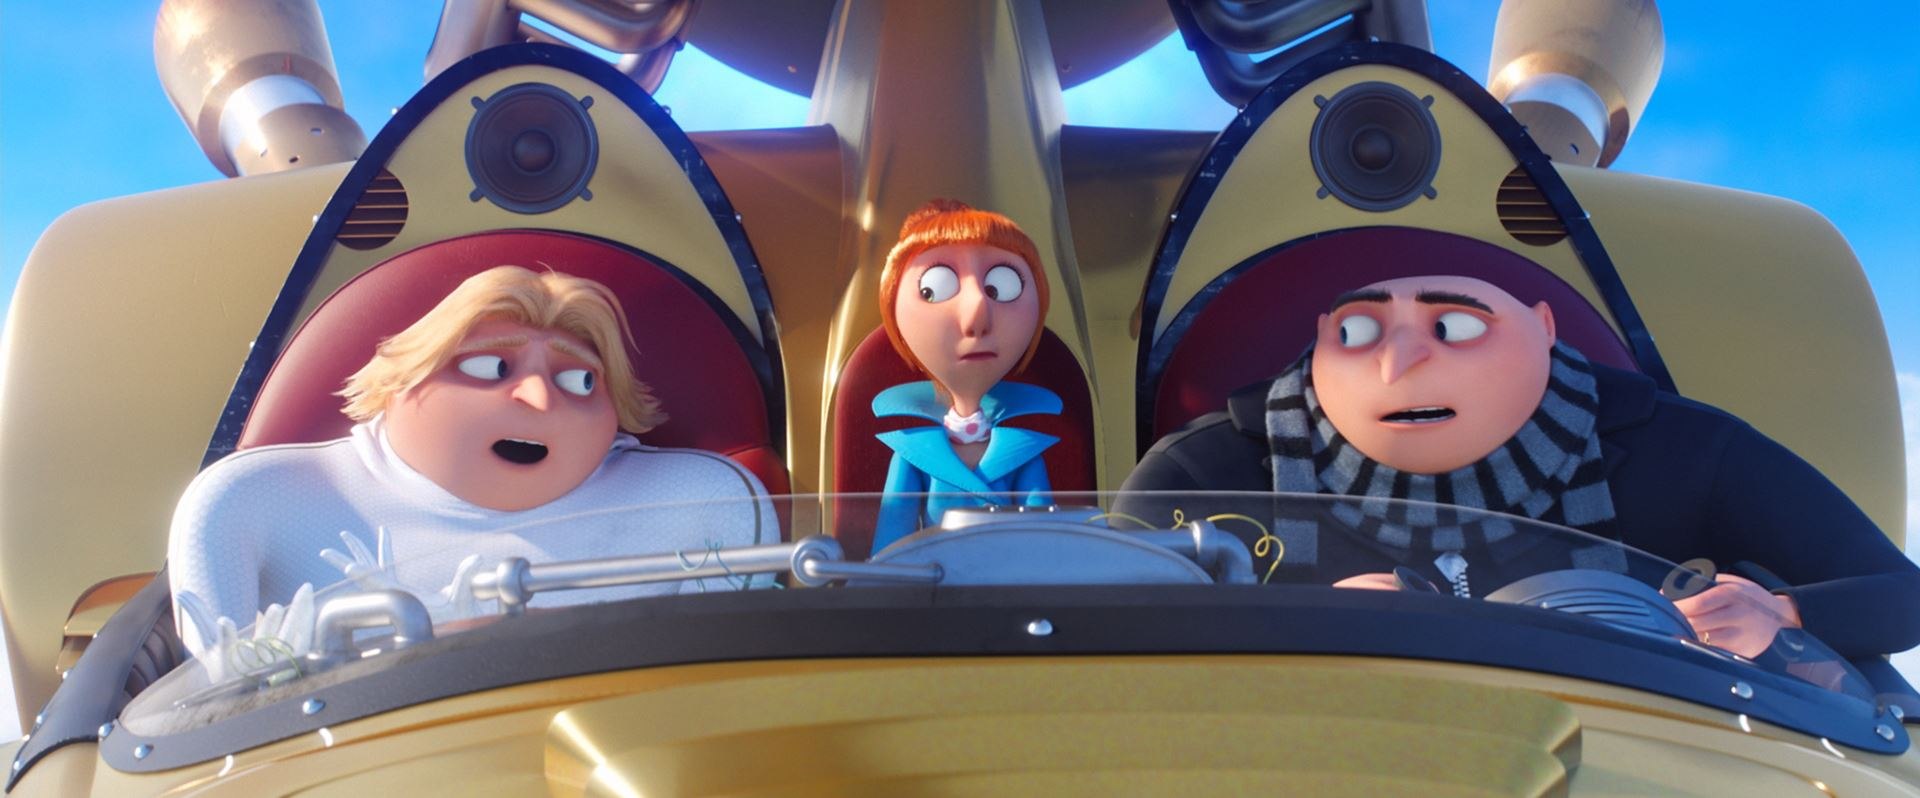 Exclusive Clip The Light Dark Of Despicable Me 3 Leads Gru And Dru Animation World Network